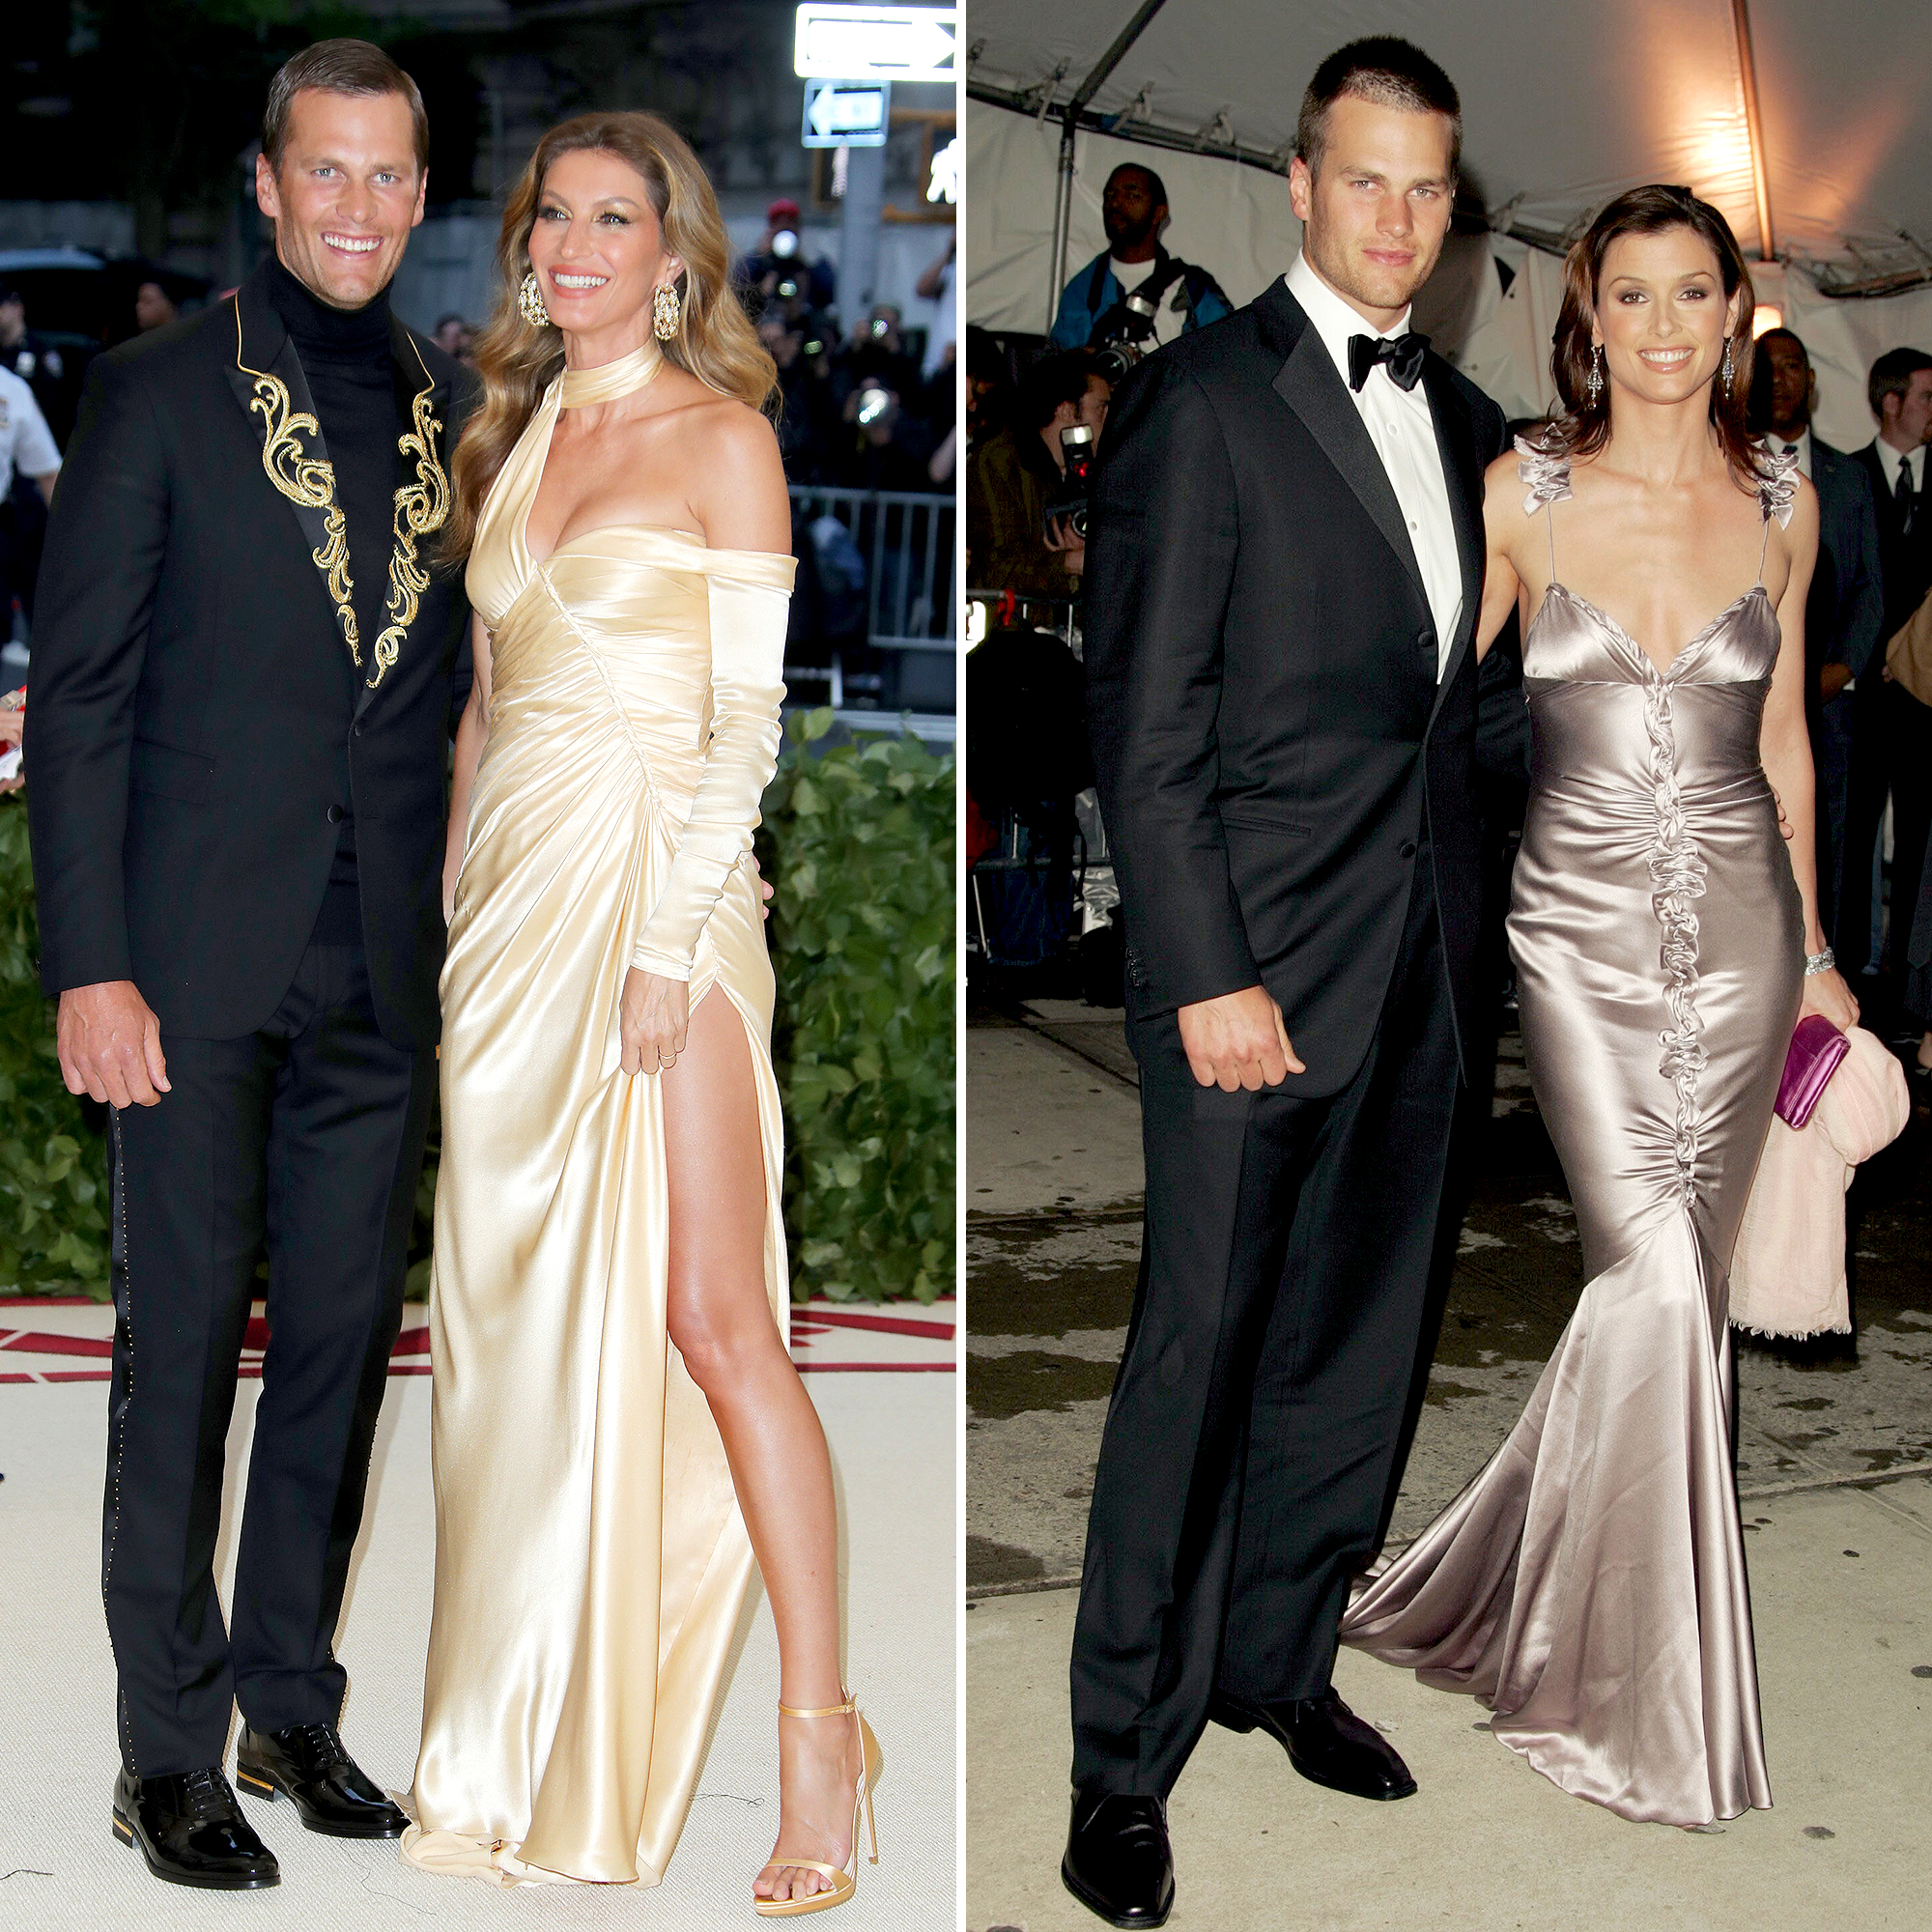 Tom Brady's Complete Dating History: Gisele Bundchen and More